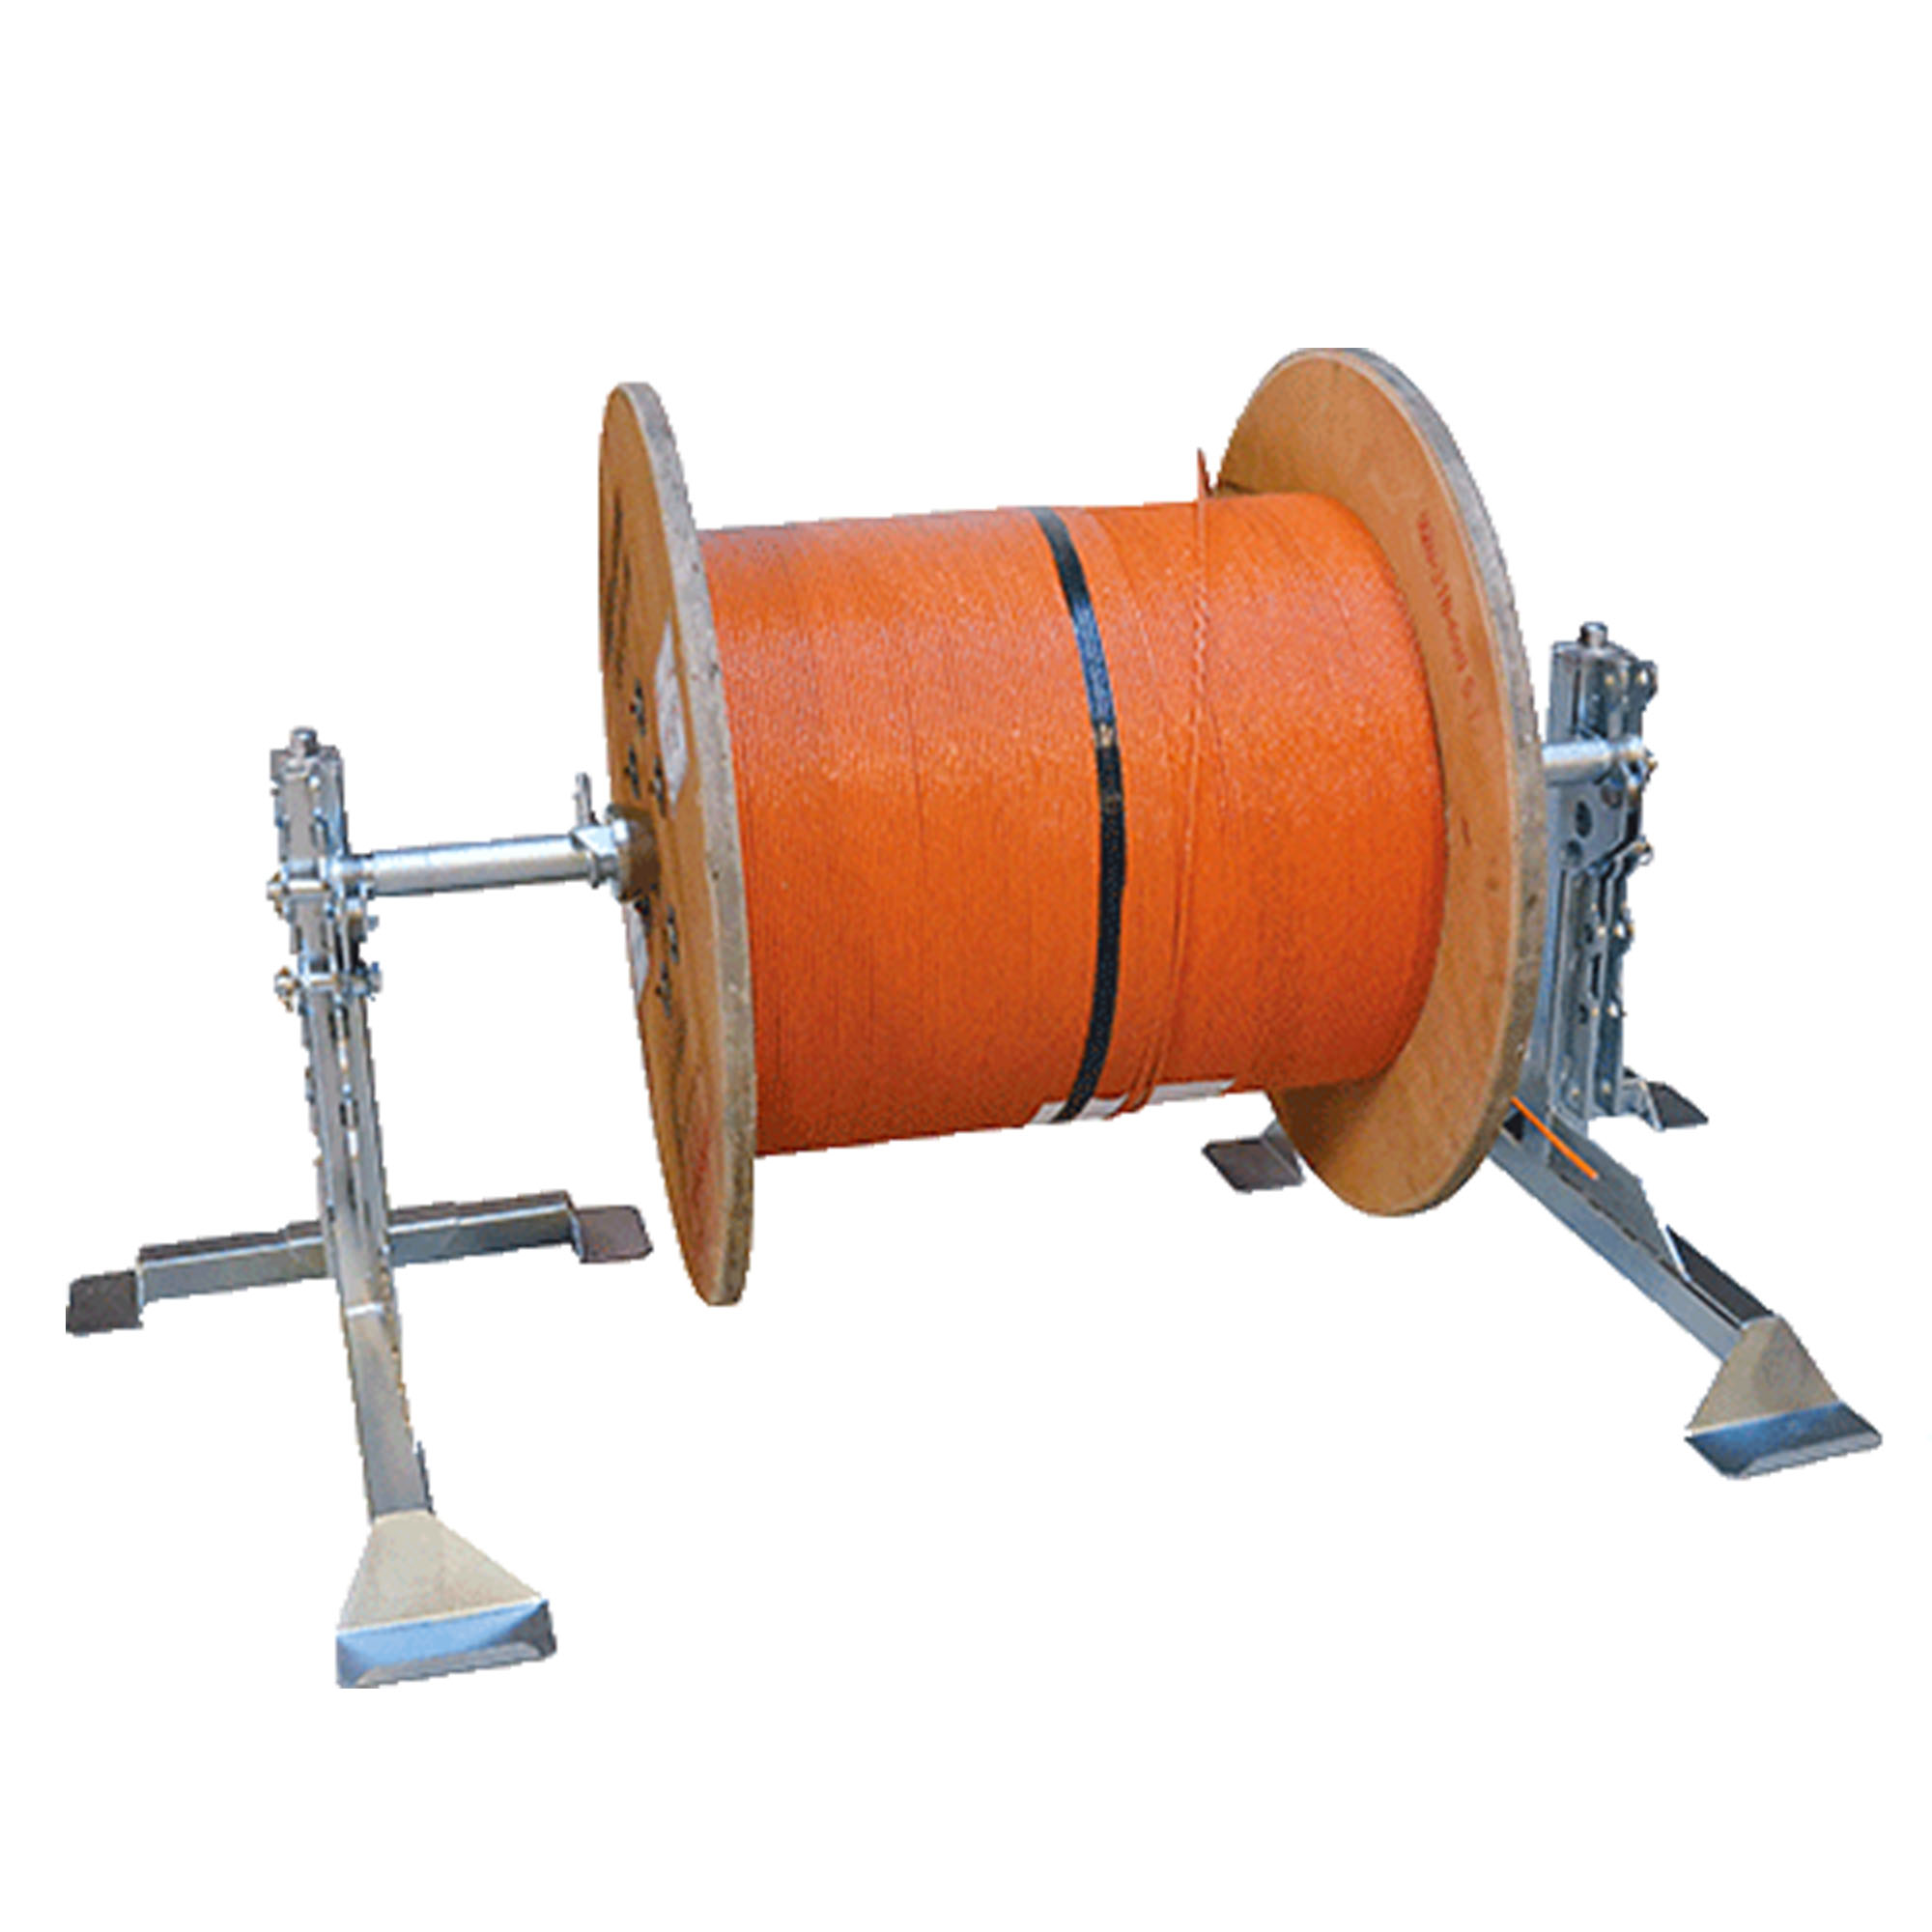 Cable reel holder, Accessories